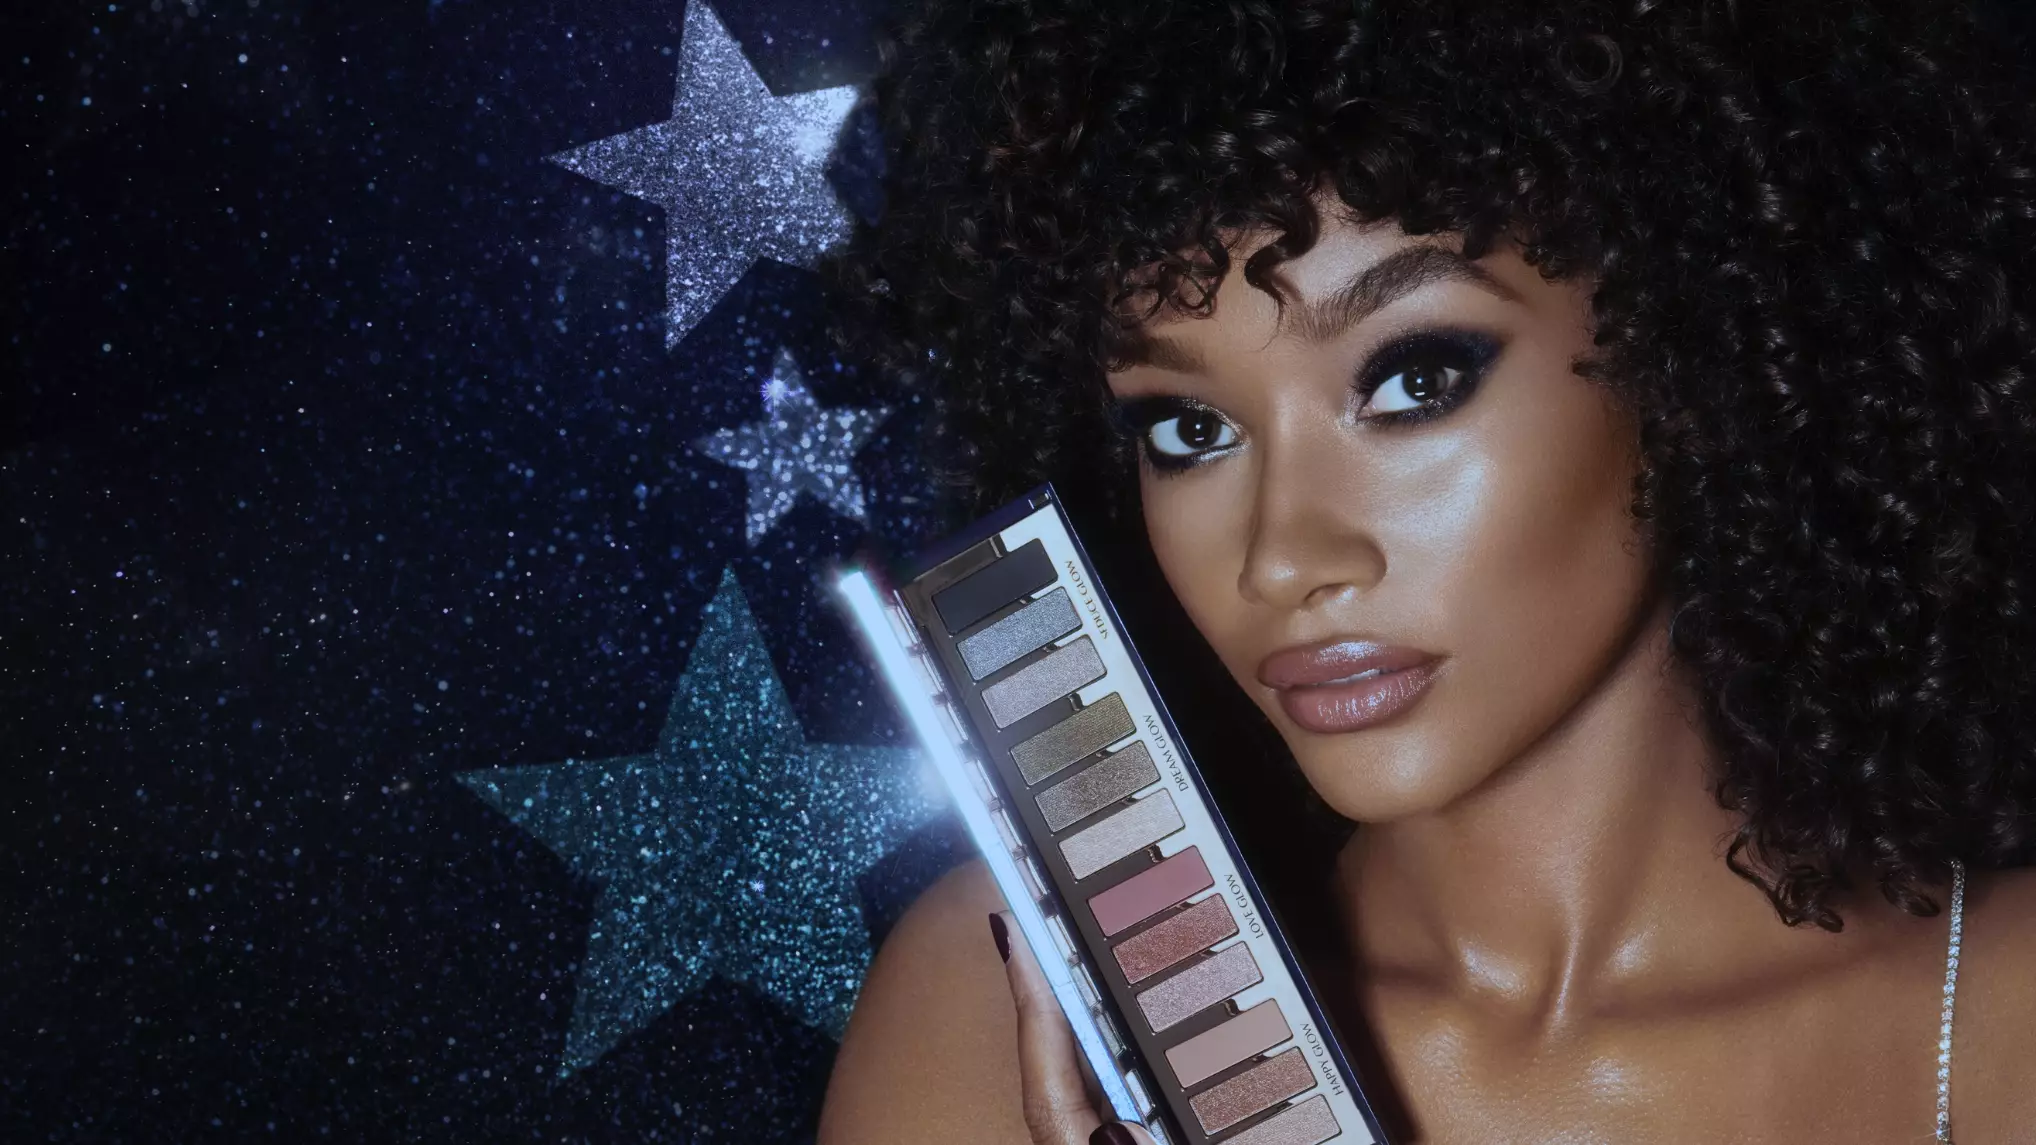 PSA: Charlotte Tilbury's New 'Starry Eyes' Palette Launches This Week - But You'll Have To Be Quick